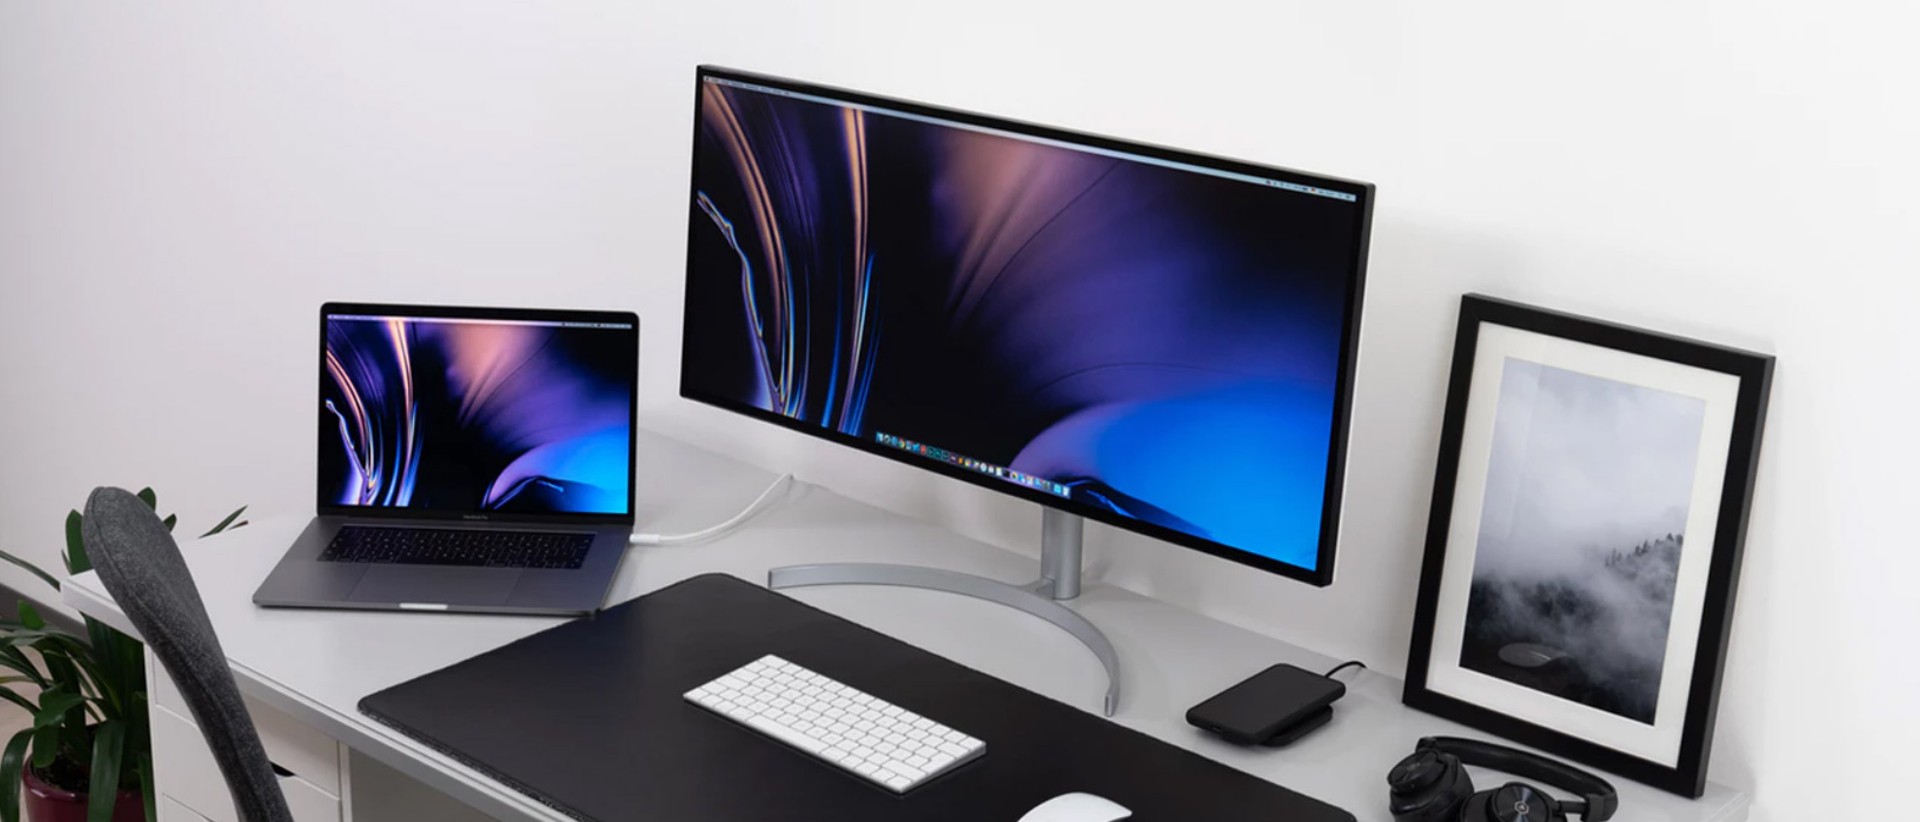 When Will the First 32 Sized Monitors Arrive with 4K and High Refresh  Rate? The Race is On! - TFTCentral